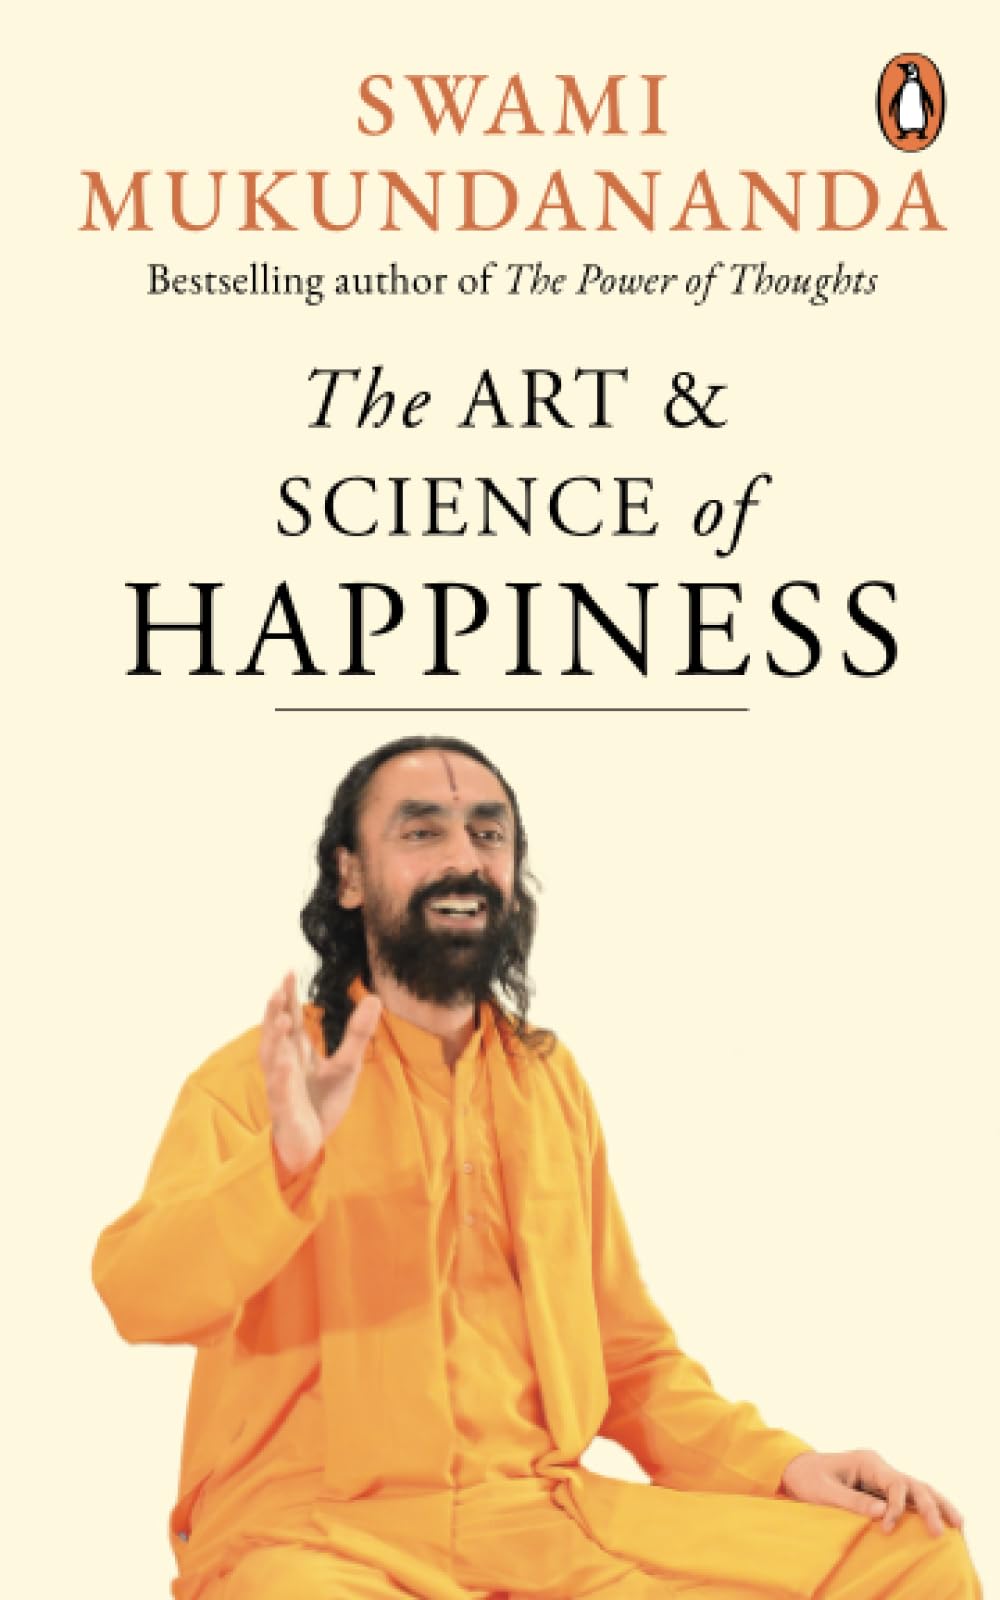 The Art & Science of Happiness